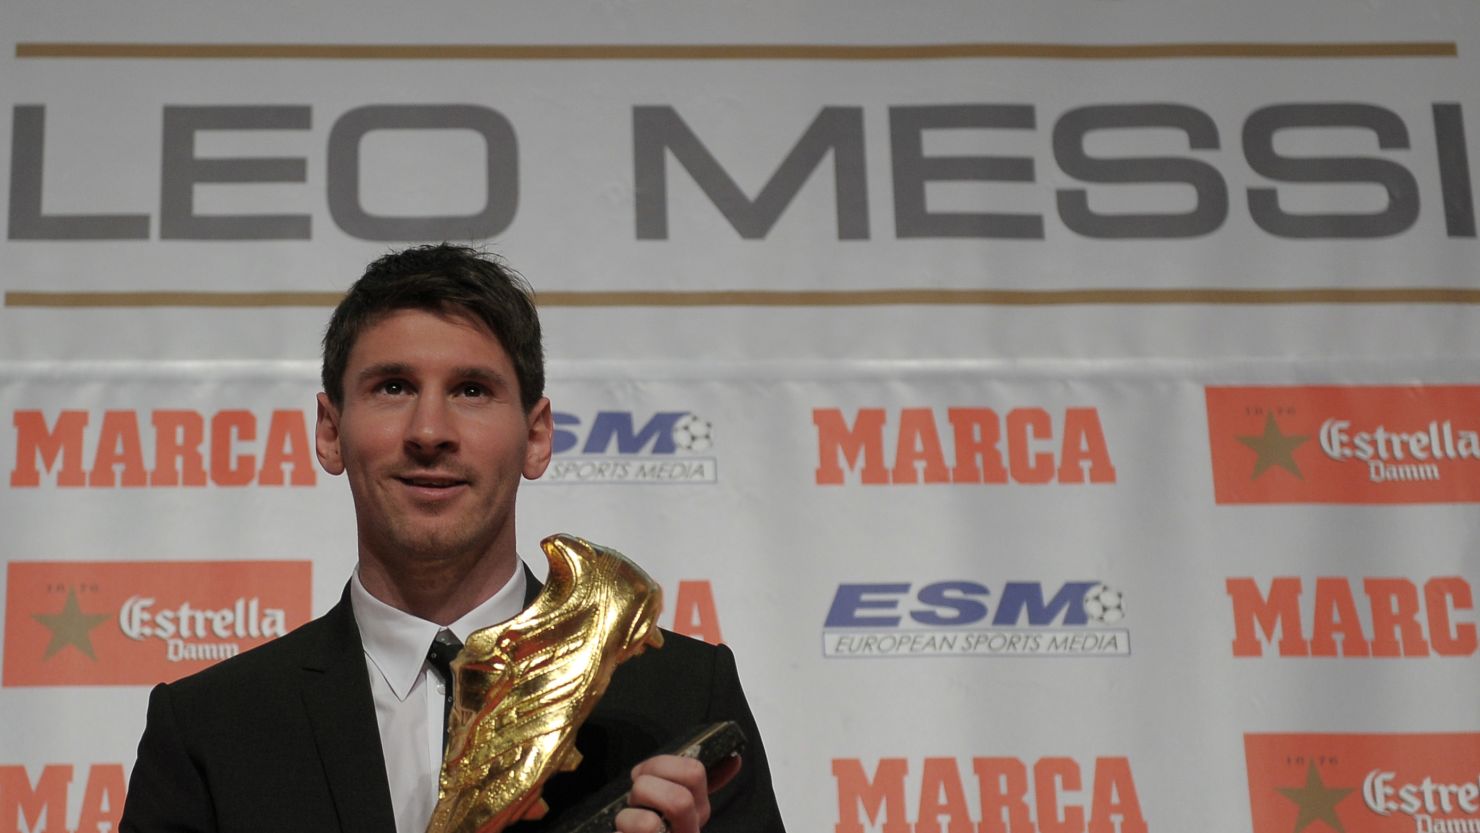 Barcelona striker Lionel Messi picked up his second golden boot, for being the top scorer in Europe for 2011/12 